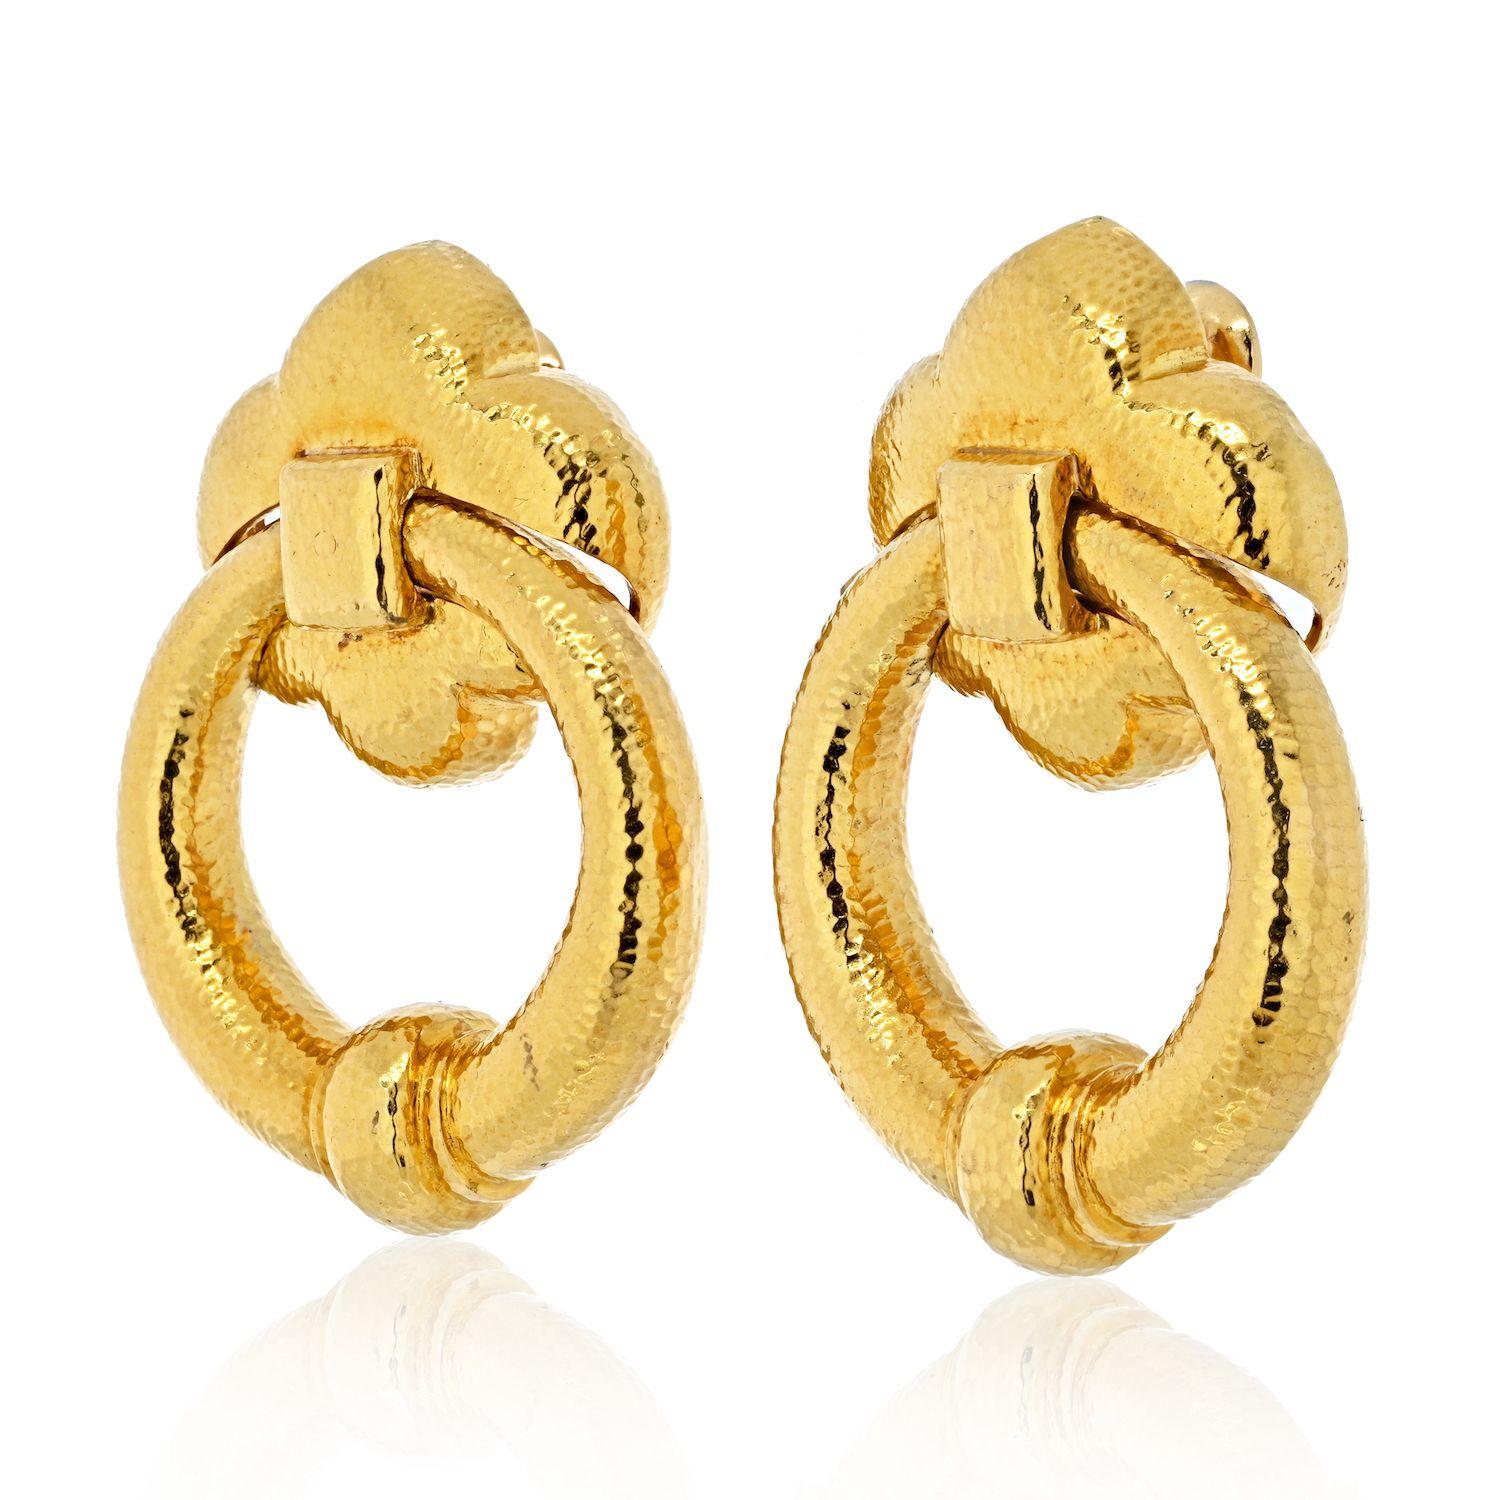 David Webb doorknocker earrings with an impressive hoop. 52mm long these earrings are meant to be worn and seen. A true David Webb lover will absolutely appriciate it and wear them daily. Bold as always with Webb, no diamonds to keep it casual,